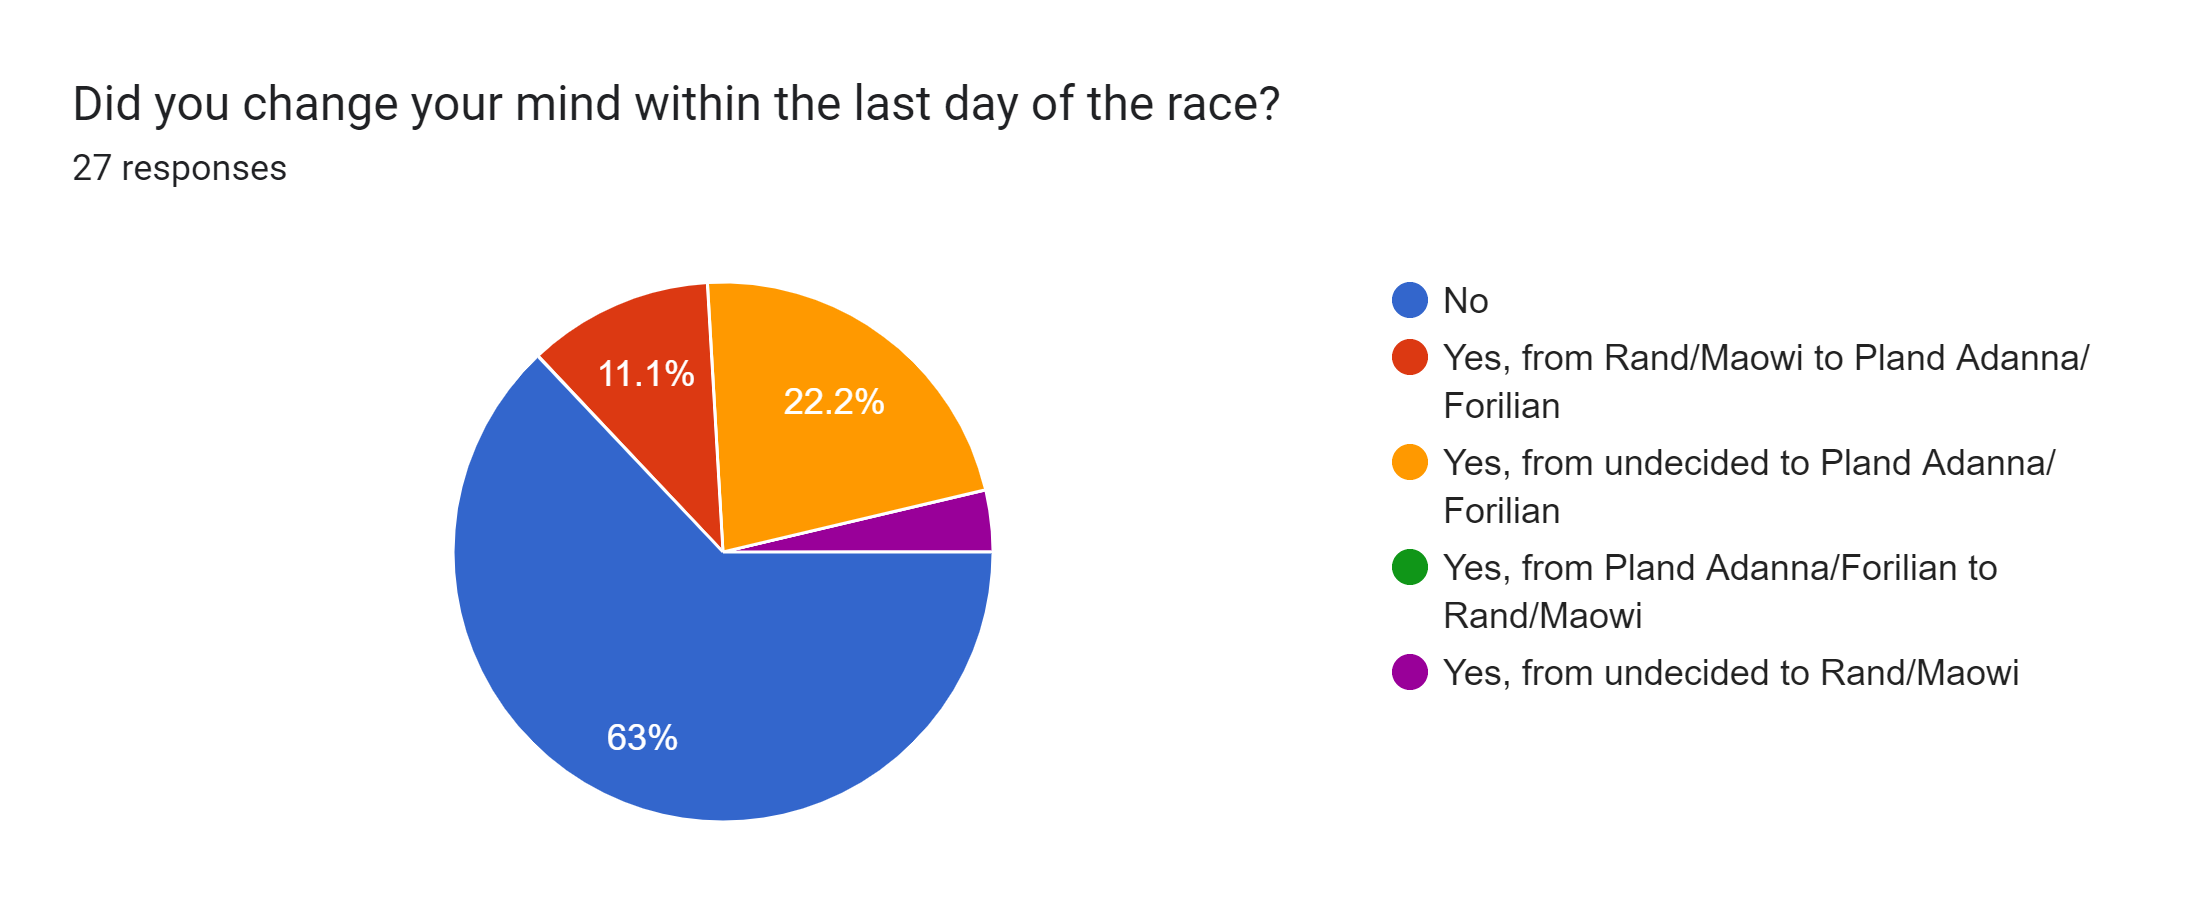 Forms response chart. Question title: Did you change your mind within the last day of the race?. Number of responses: 27 responses.